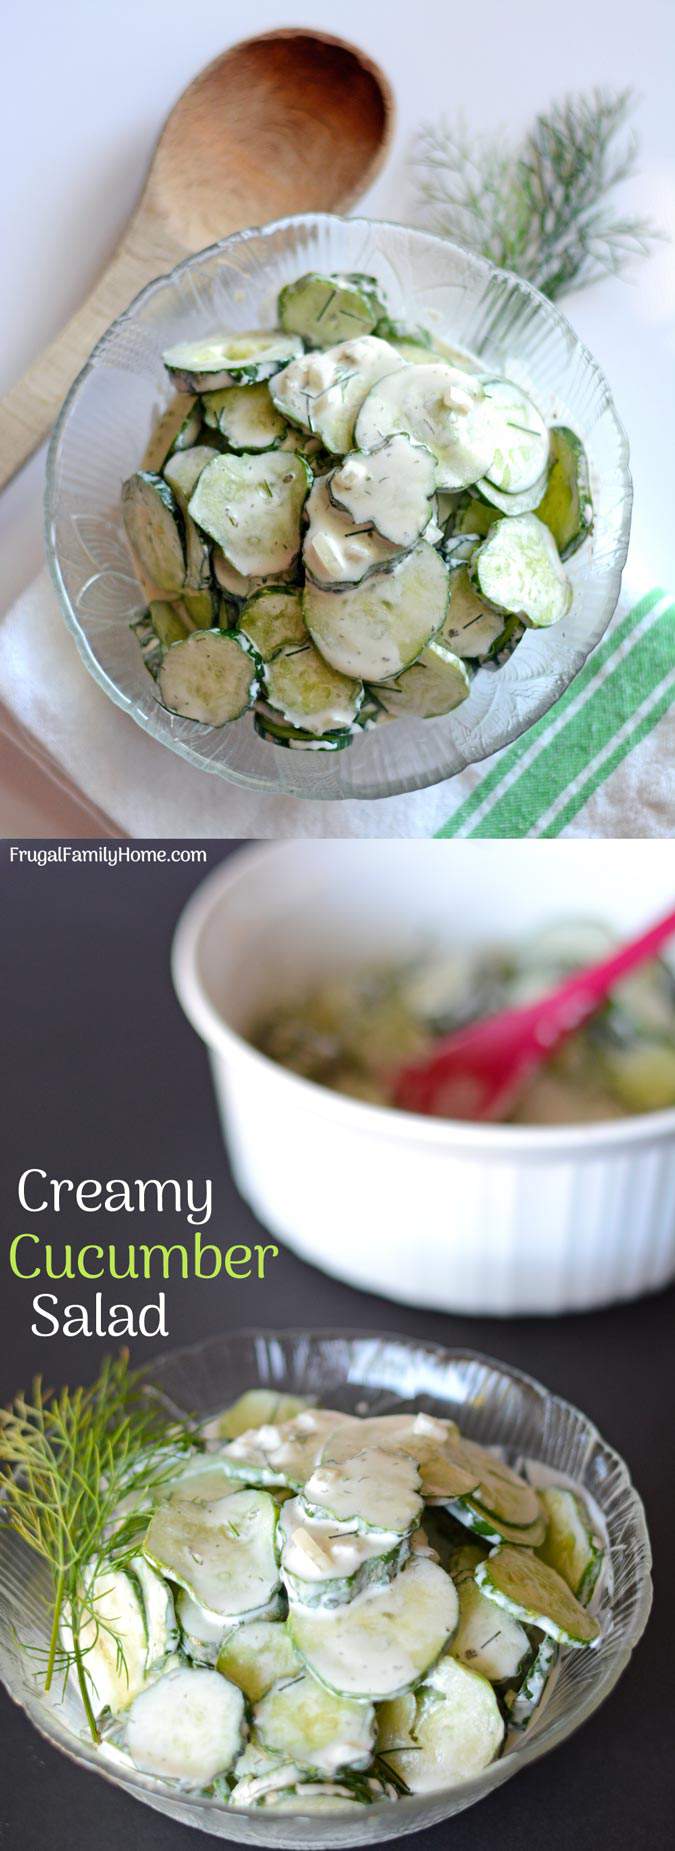 I love to have a creamy and cool salad in the summer. What could be cooler than a simple and easy cucumber salad? This is the best cucumber salad recipe. It contains simple ingredients and is really easy to make too. The sour cream in this recipe makes a creamy cucumber salad that you can’t resist. This recipe is our favorite, tried, and true recipe for cucumber salad.